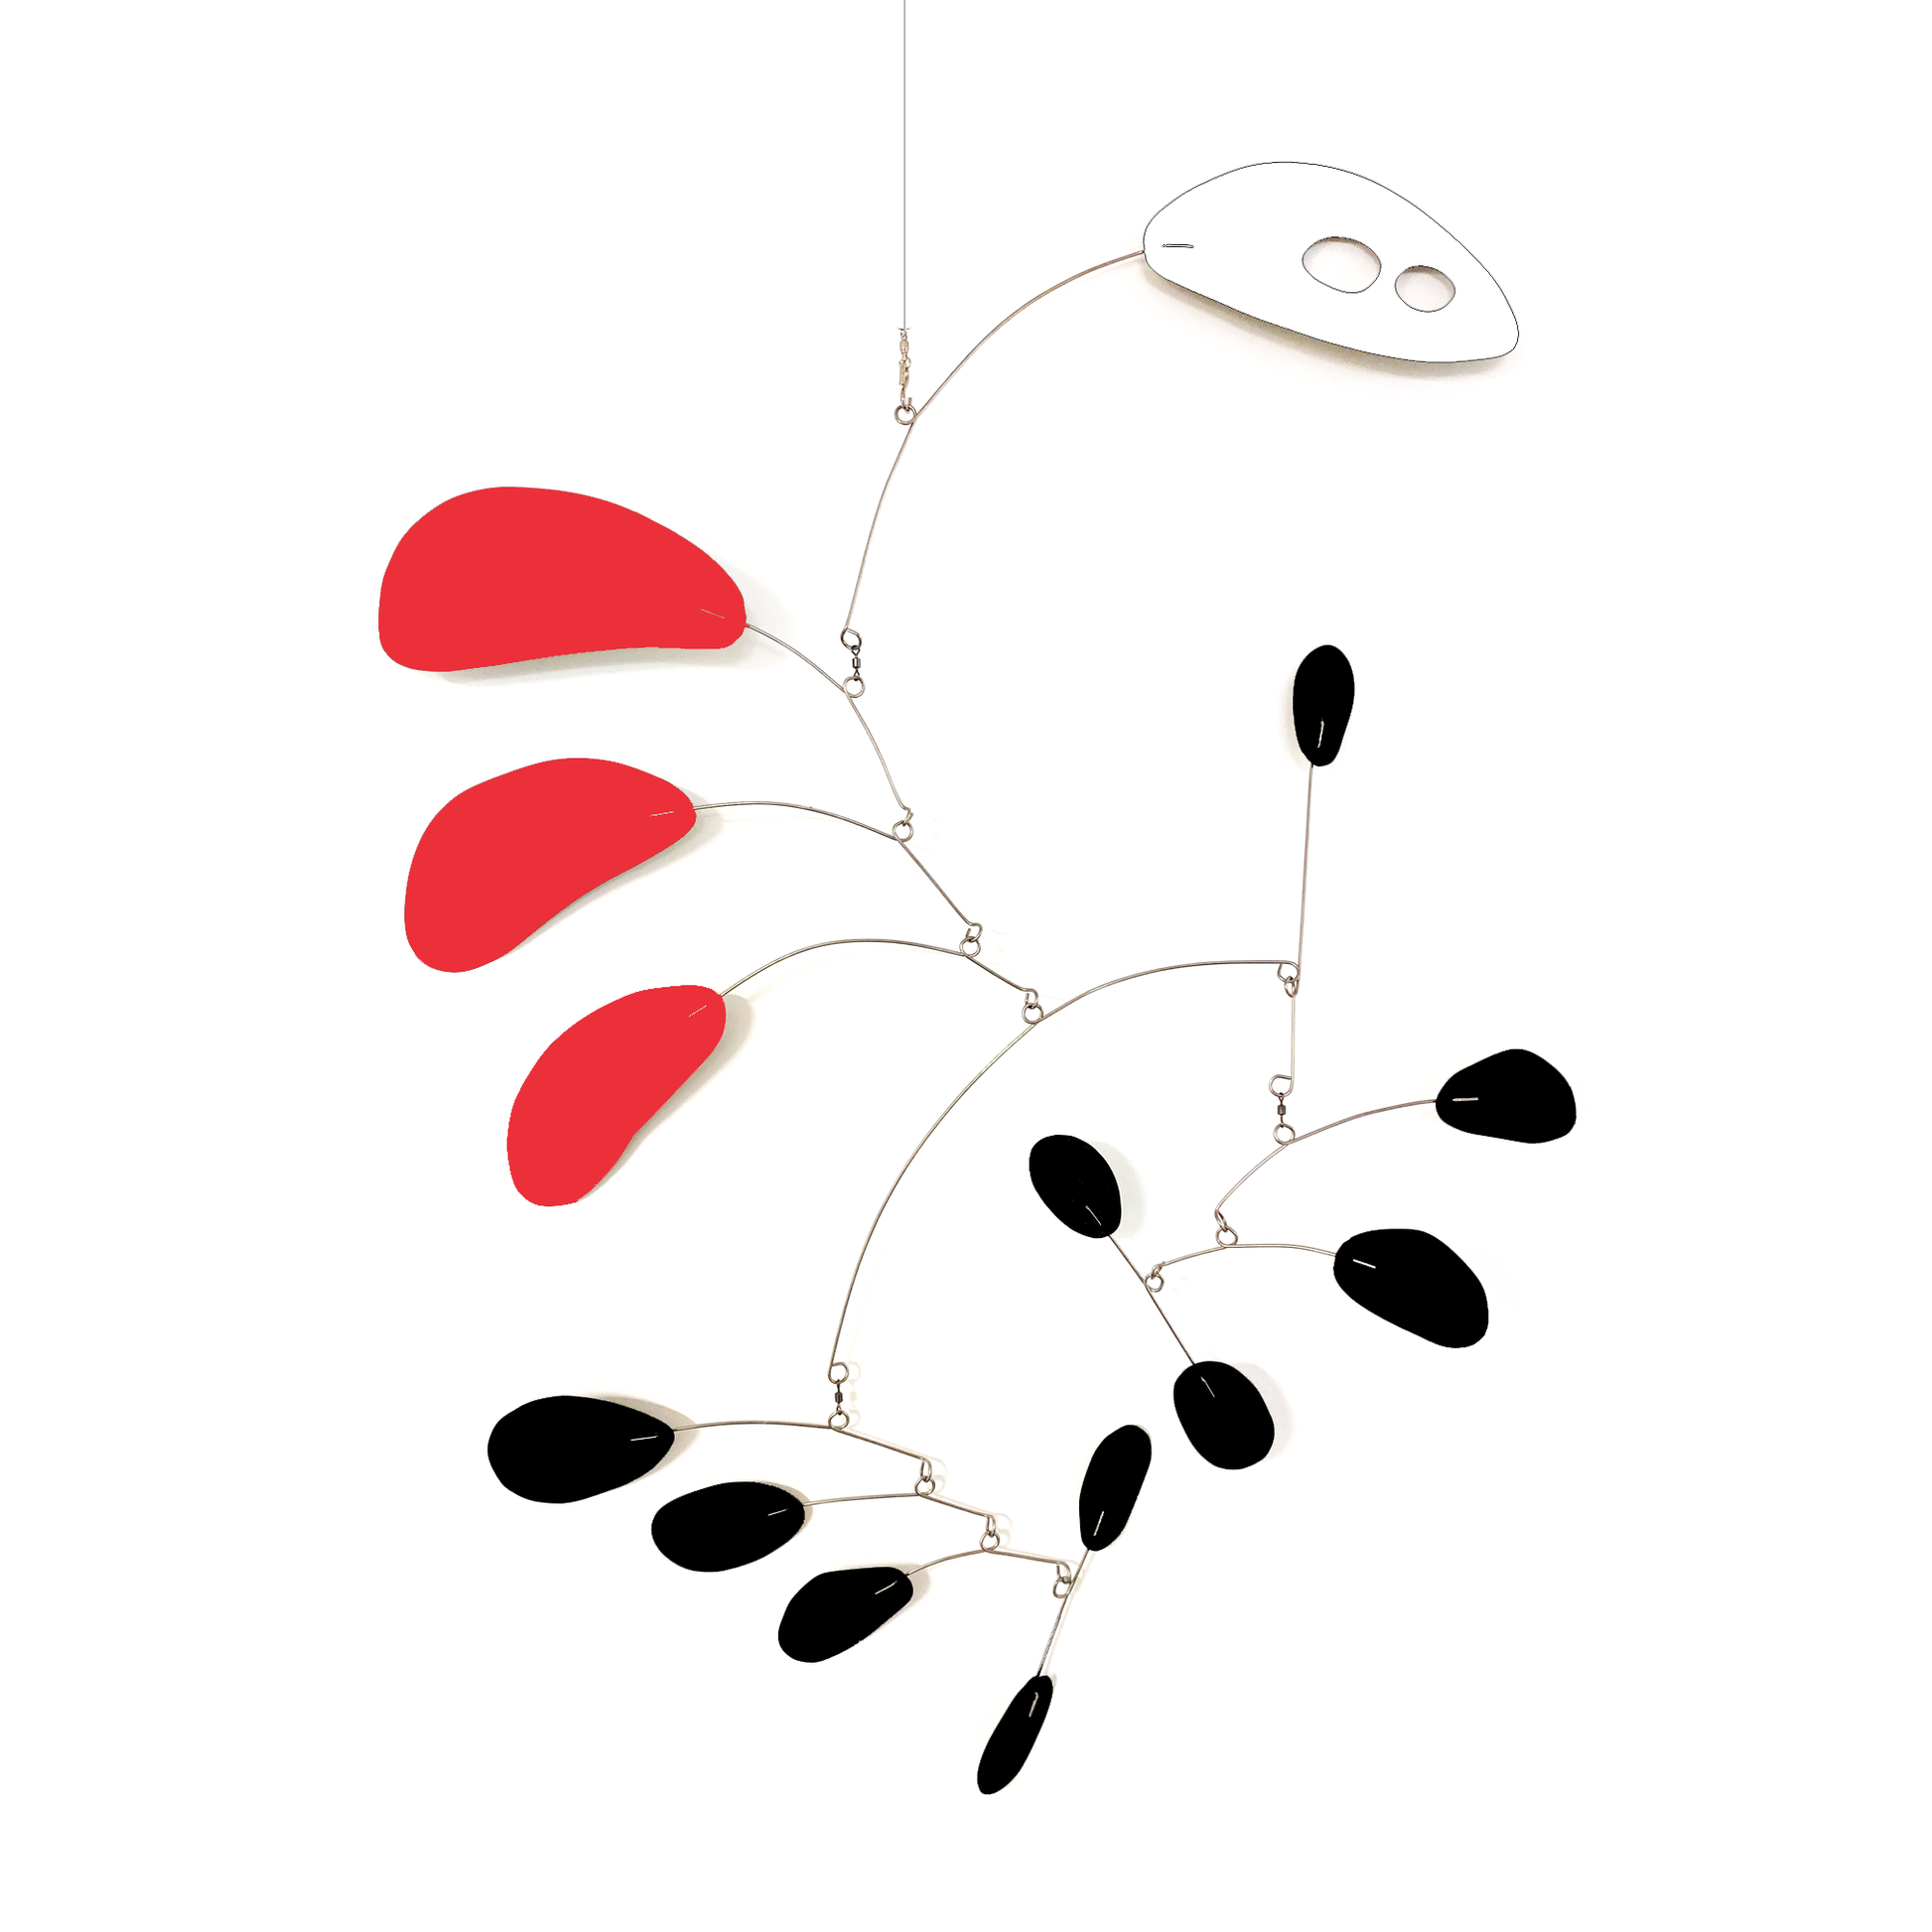 CoolCat mid century modern inspired hanging kinetic art mobile in modern colors of red, black, and white by AtomicMobiles.com